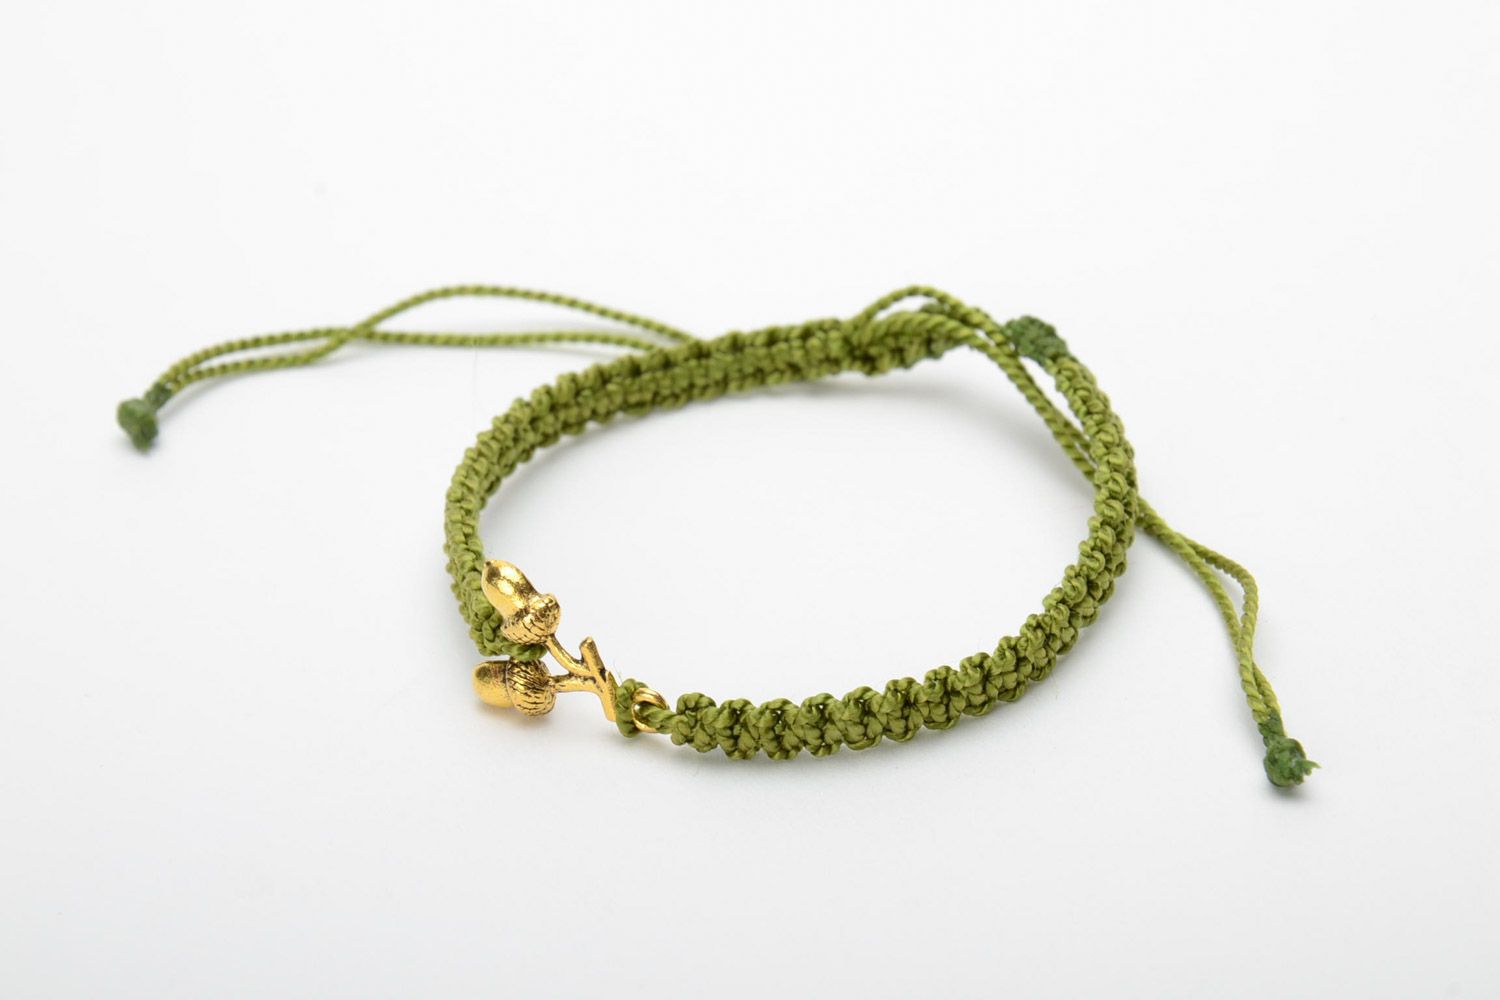 Women's handmade macrame woven thread bracelet of green color with metal charms in the shape of acorns photo 3